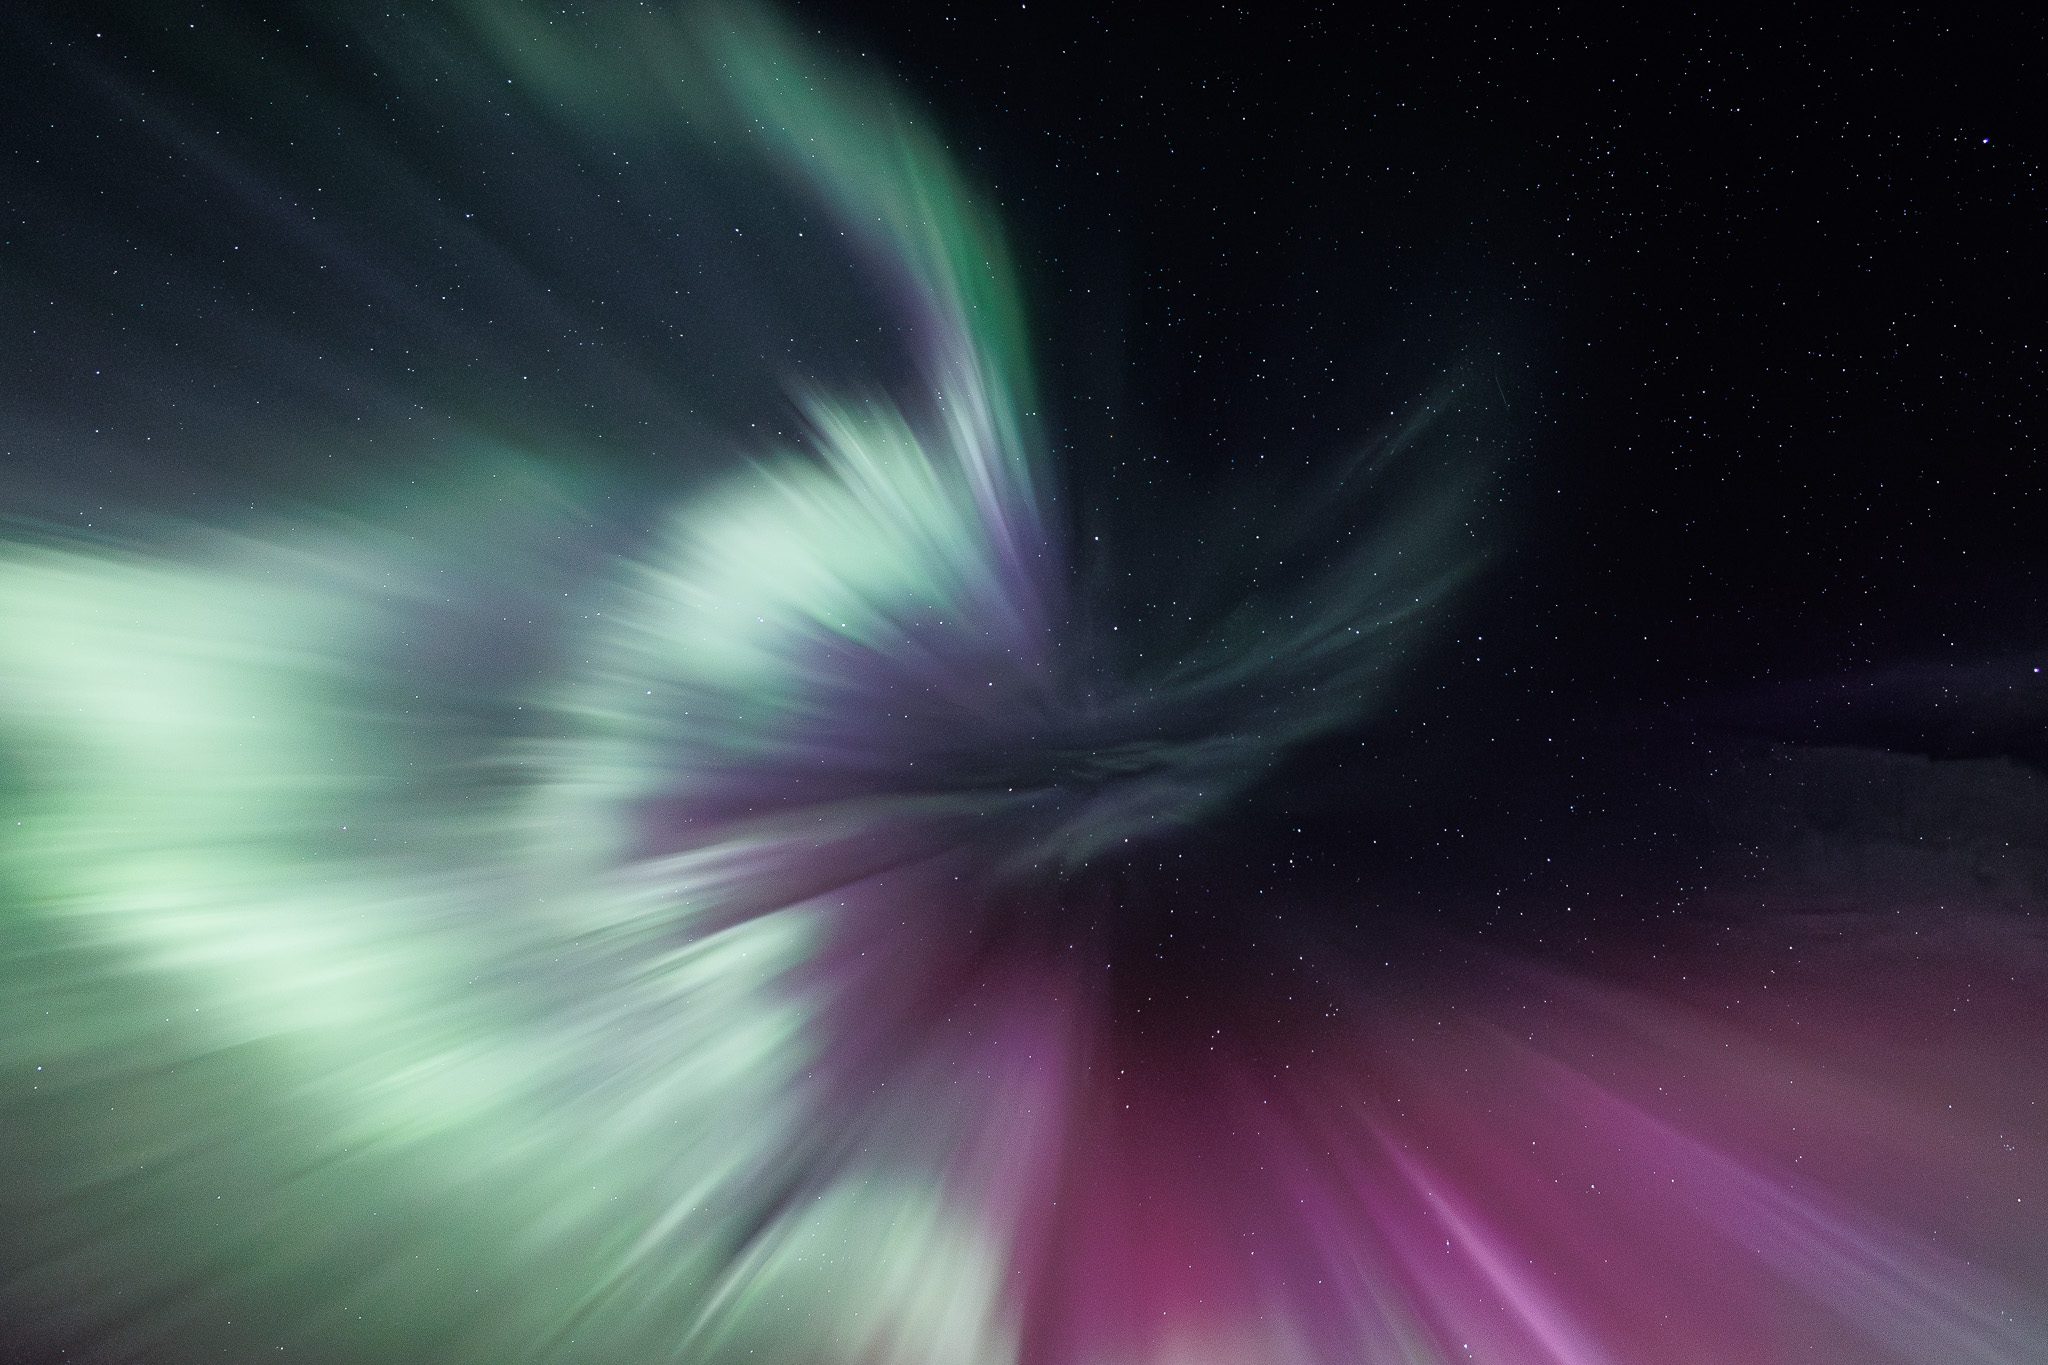 5 Mistakes To Avoid When Photographing the Northern Lights